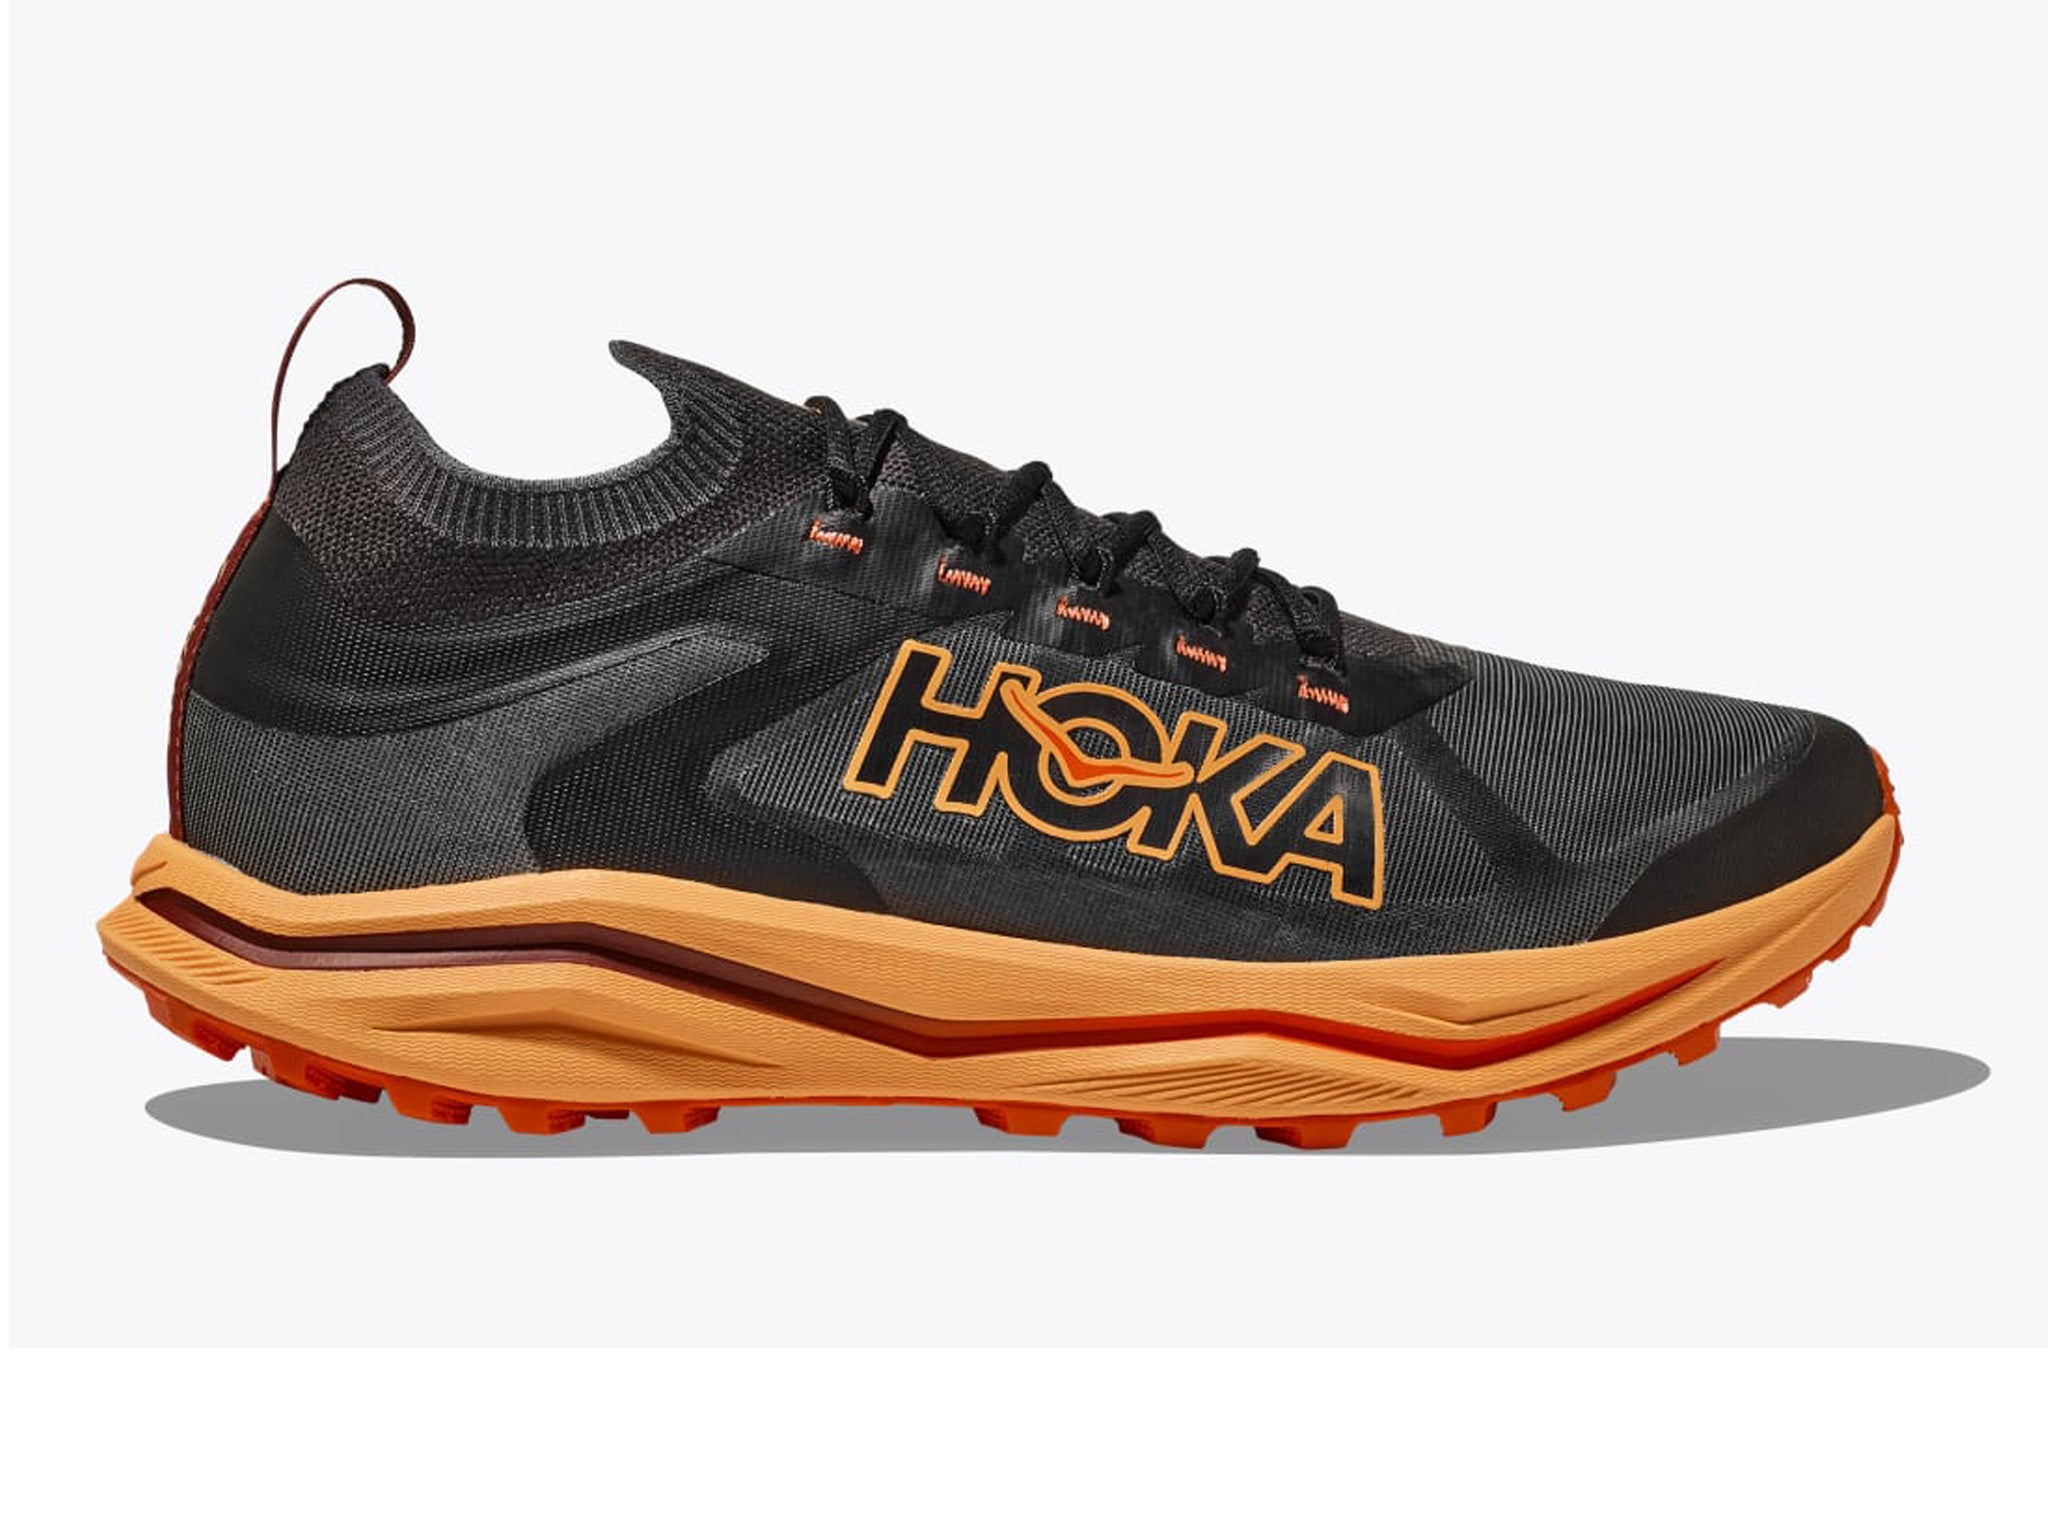 Hoka-Indybest-review